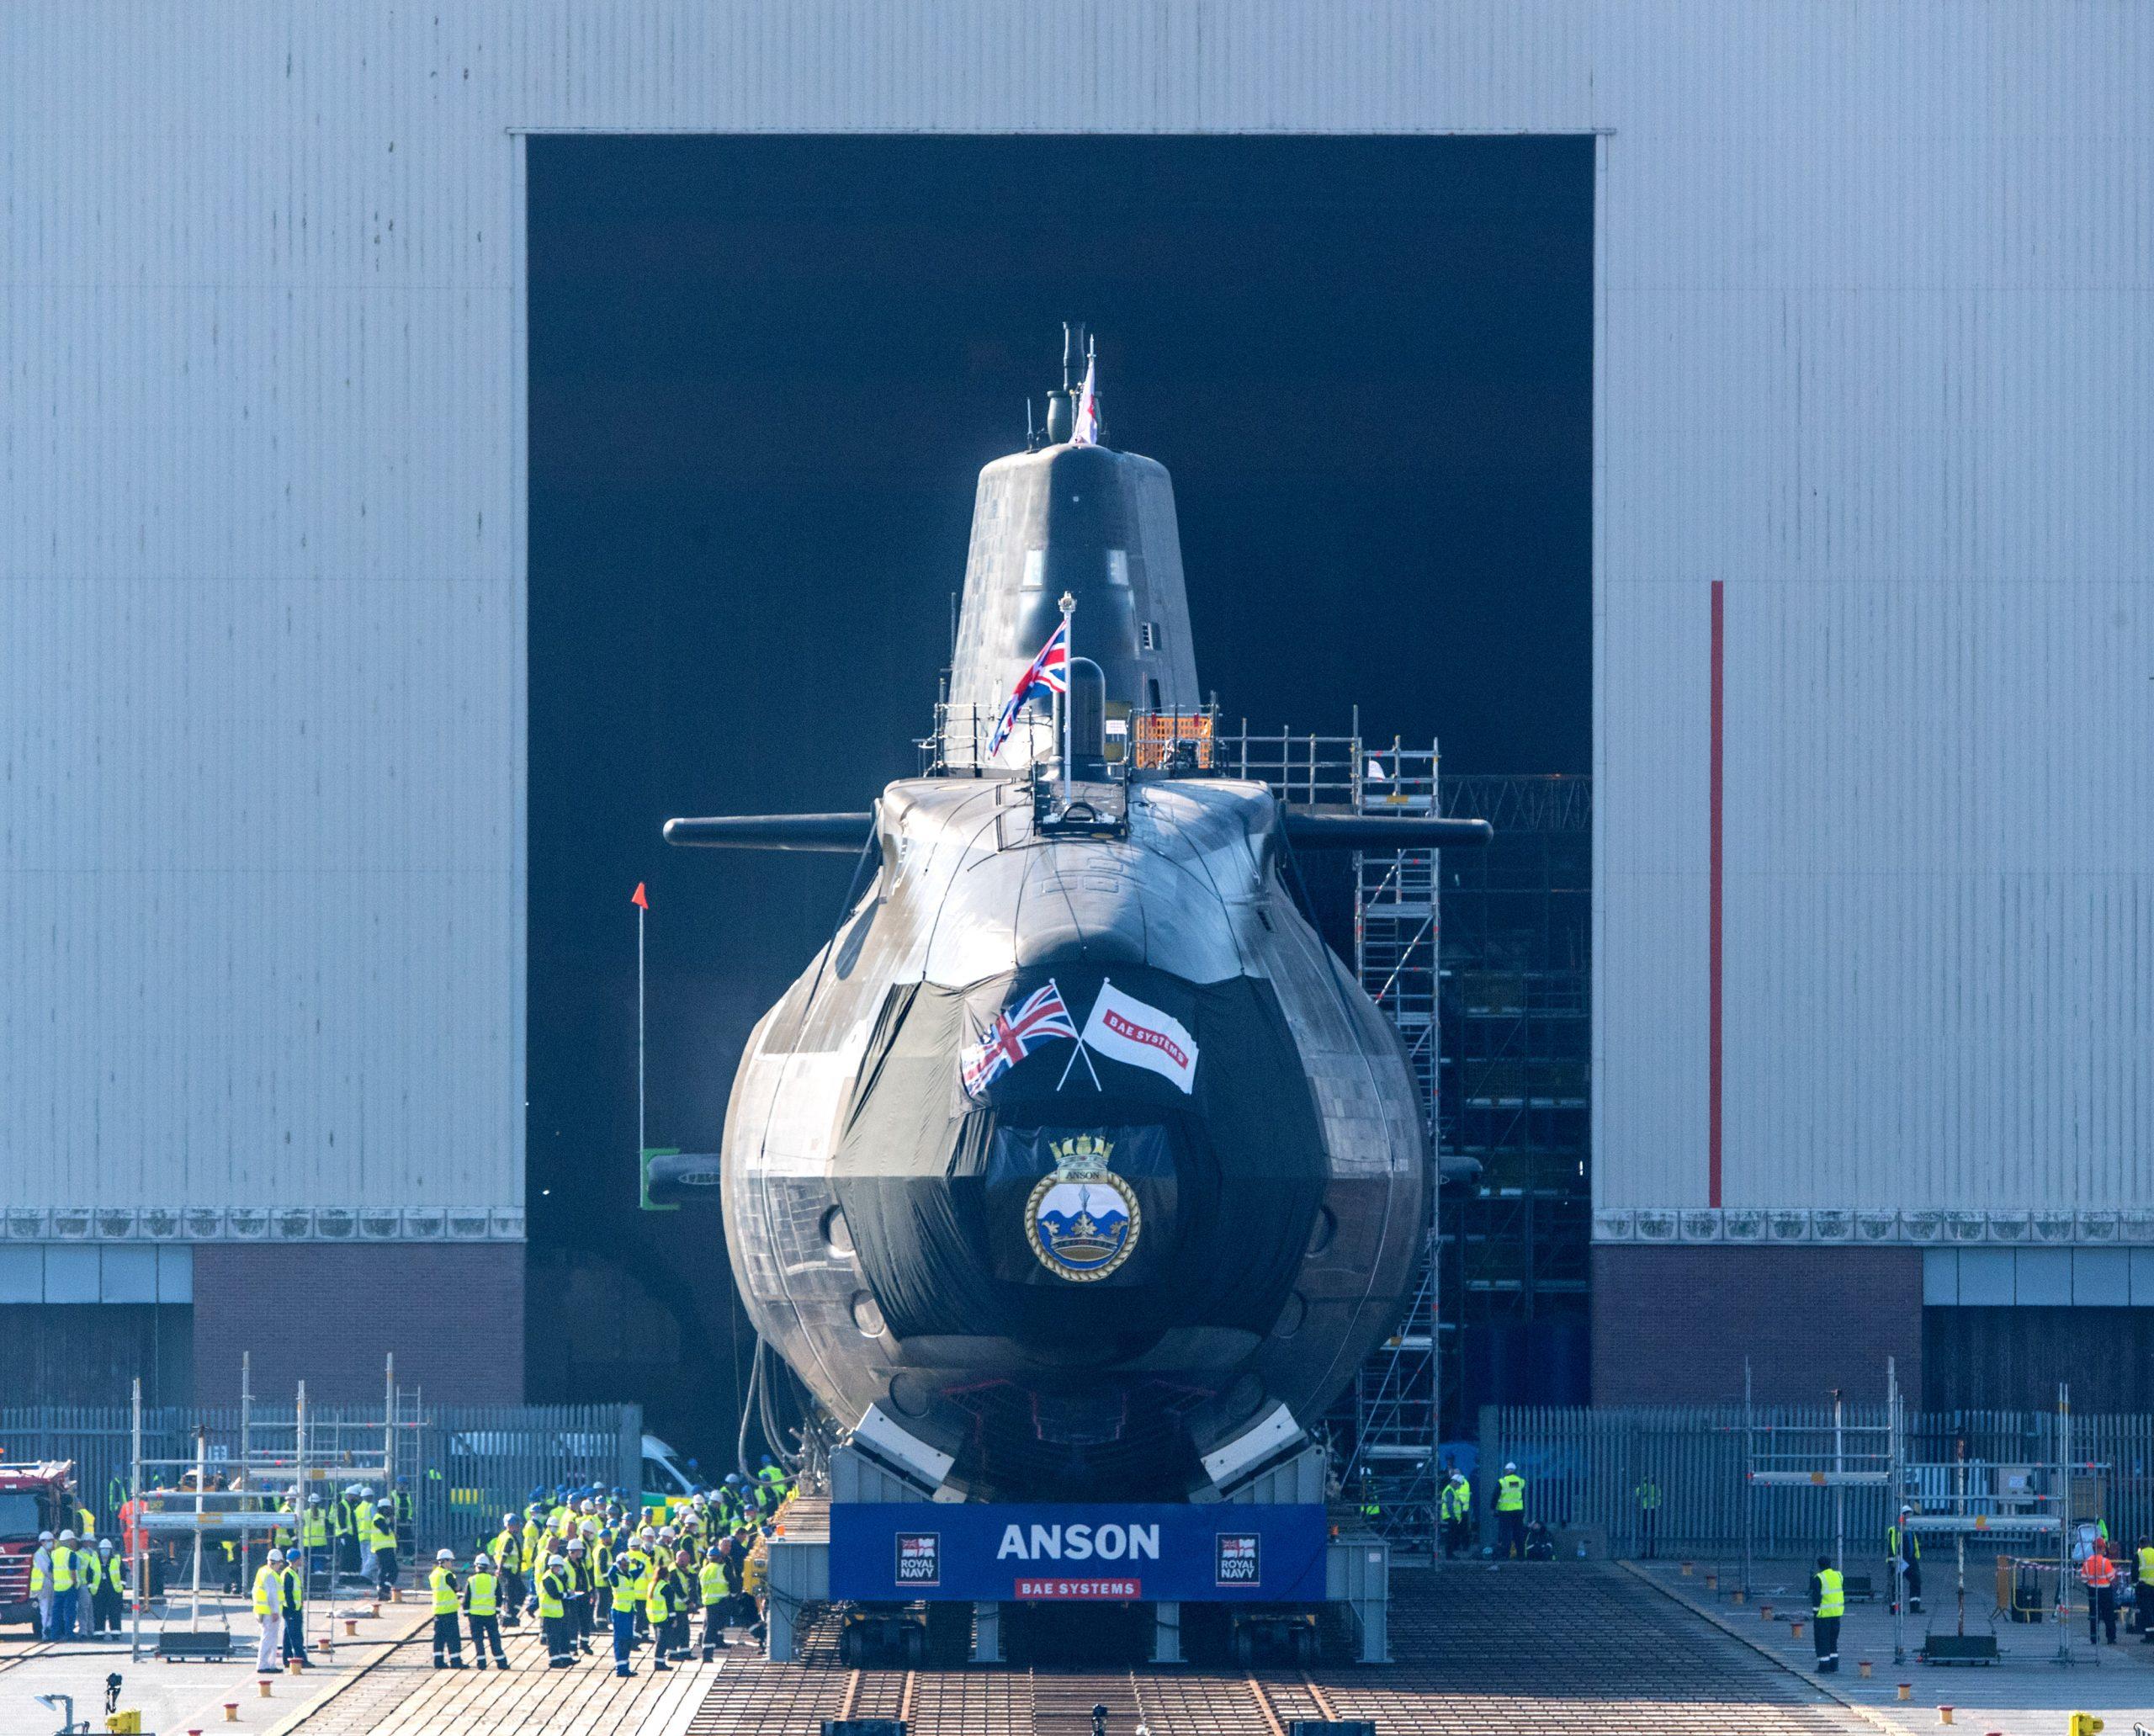 The fifth Astute Class attack submarine Anson, being built for the Royal Navy, has been launched by BAE Systems